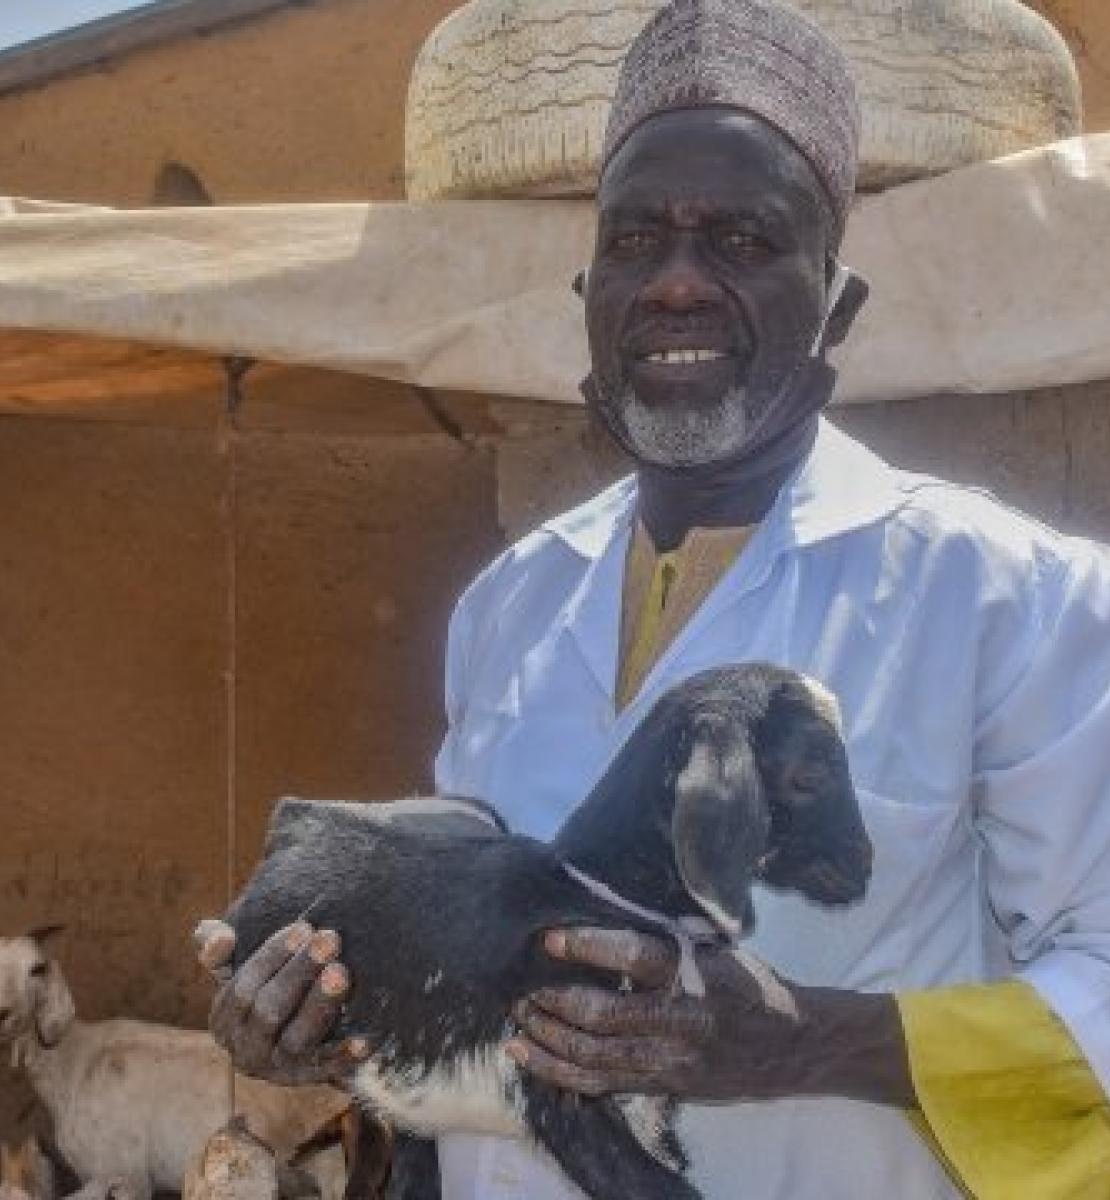 In Cameroon, a man wearing a sky-blue blouse and a head covering is photographed standing in front of a terracotta house, a baby goat in his arms, looking at the camera.